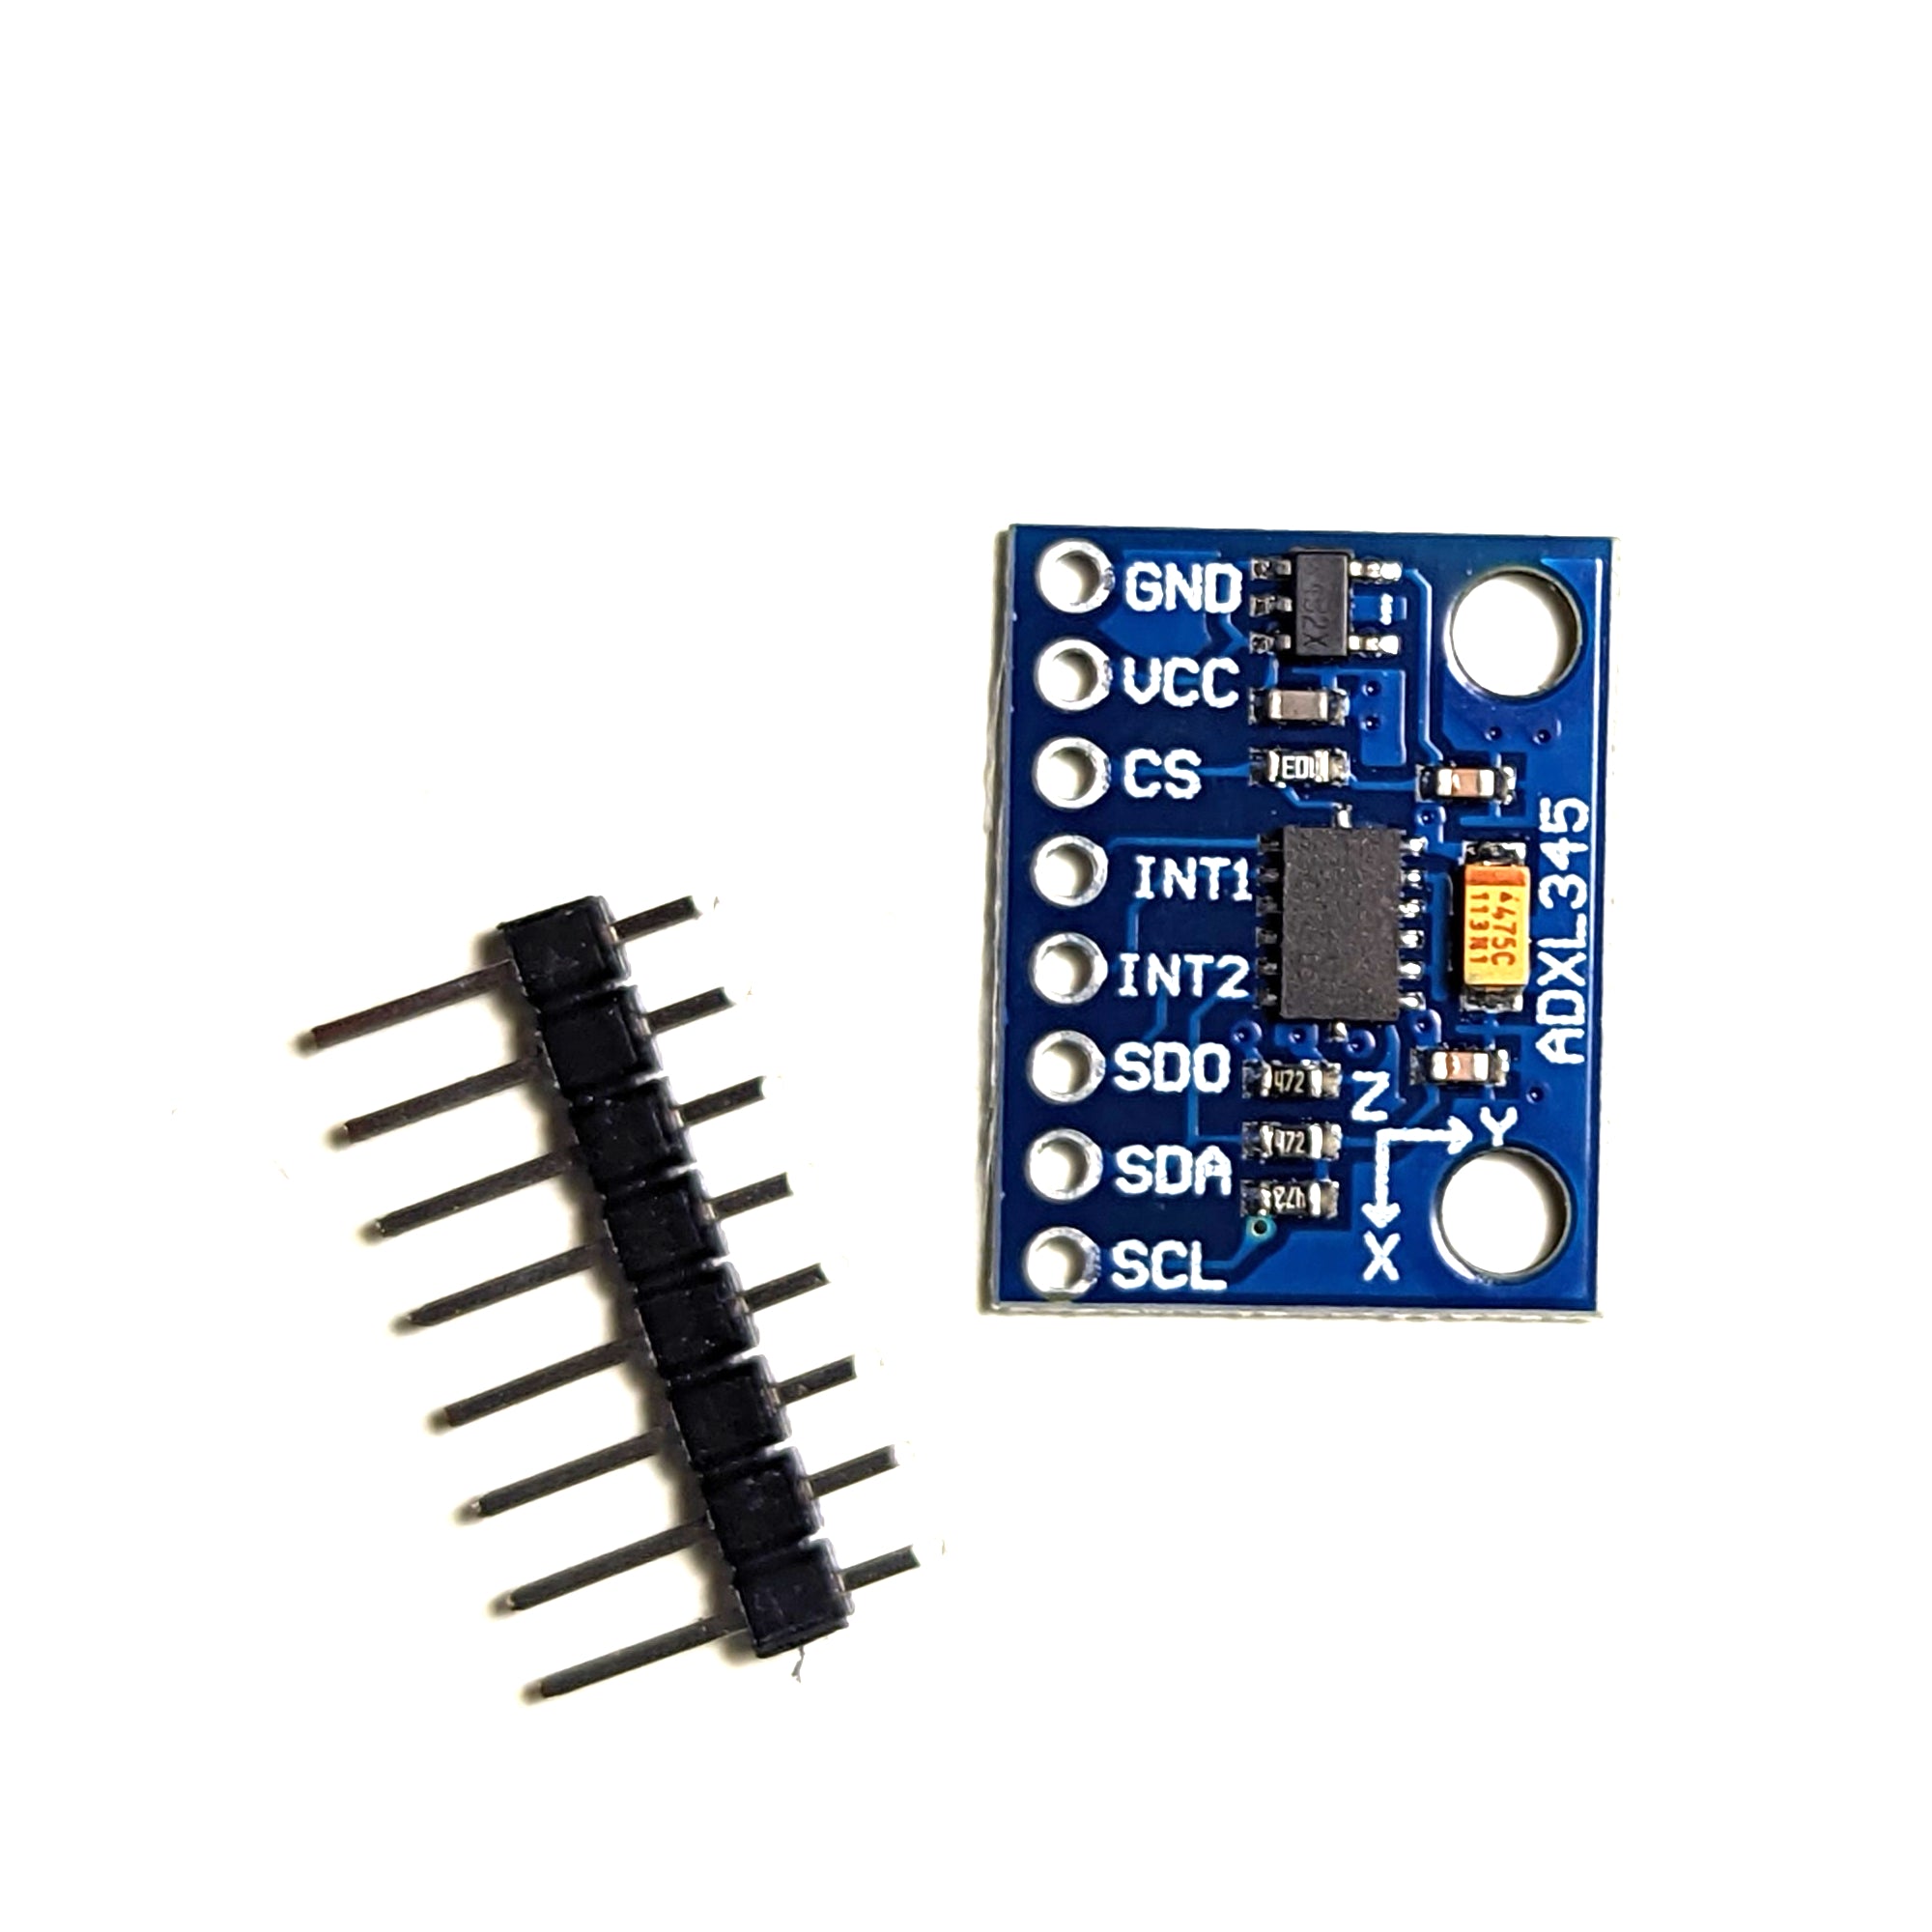 ADXL345 3-Axis Accelerometer (2 pack) – PTSolns